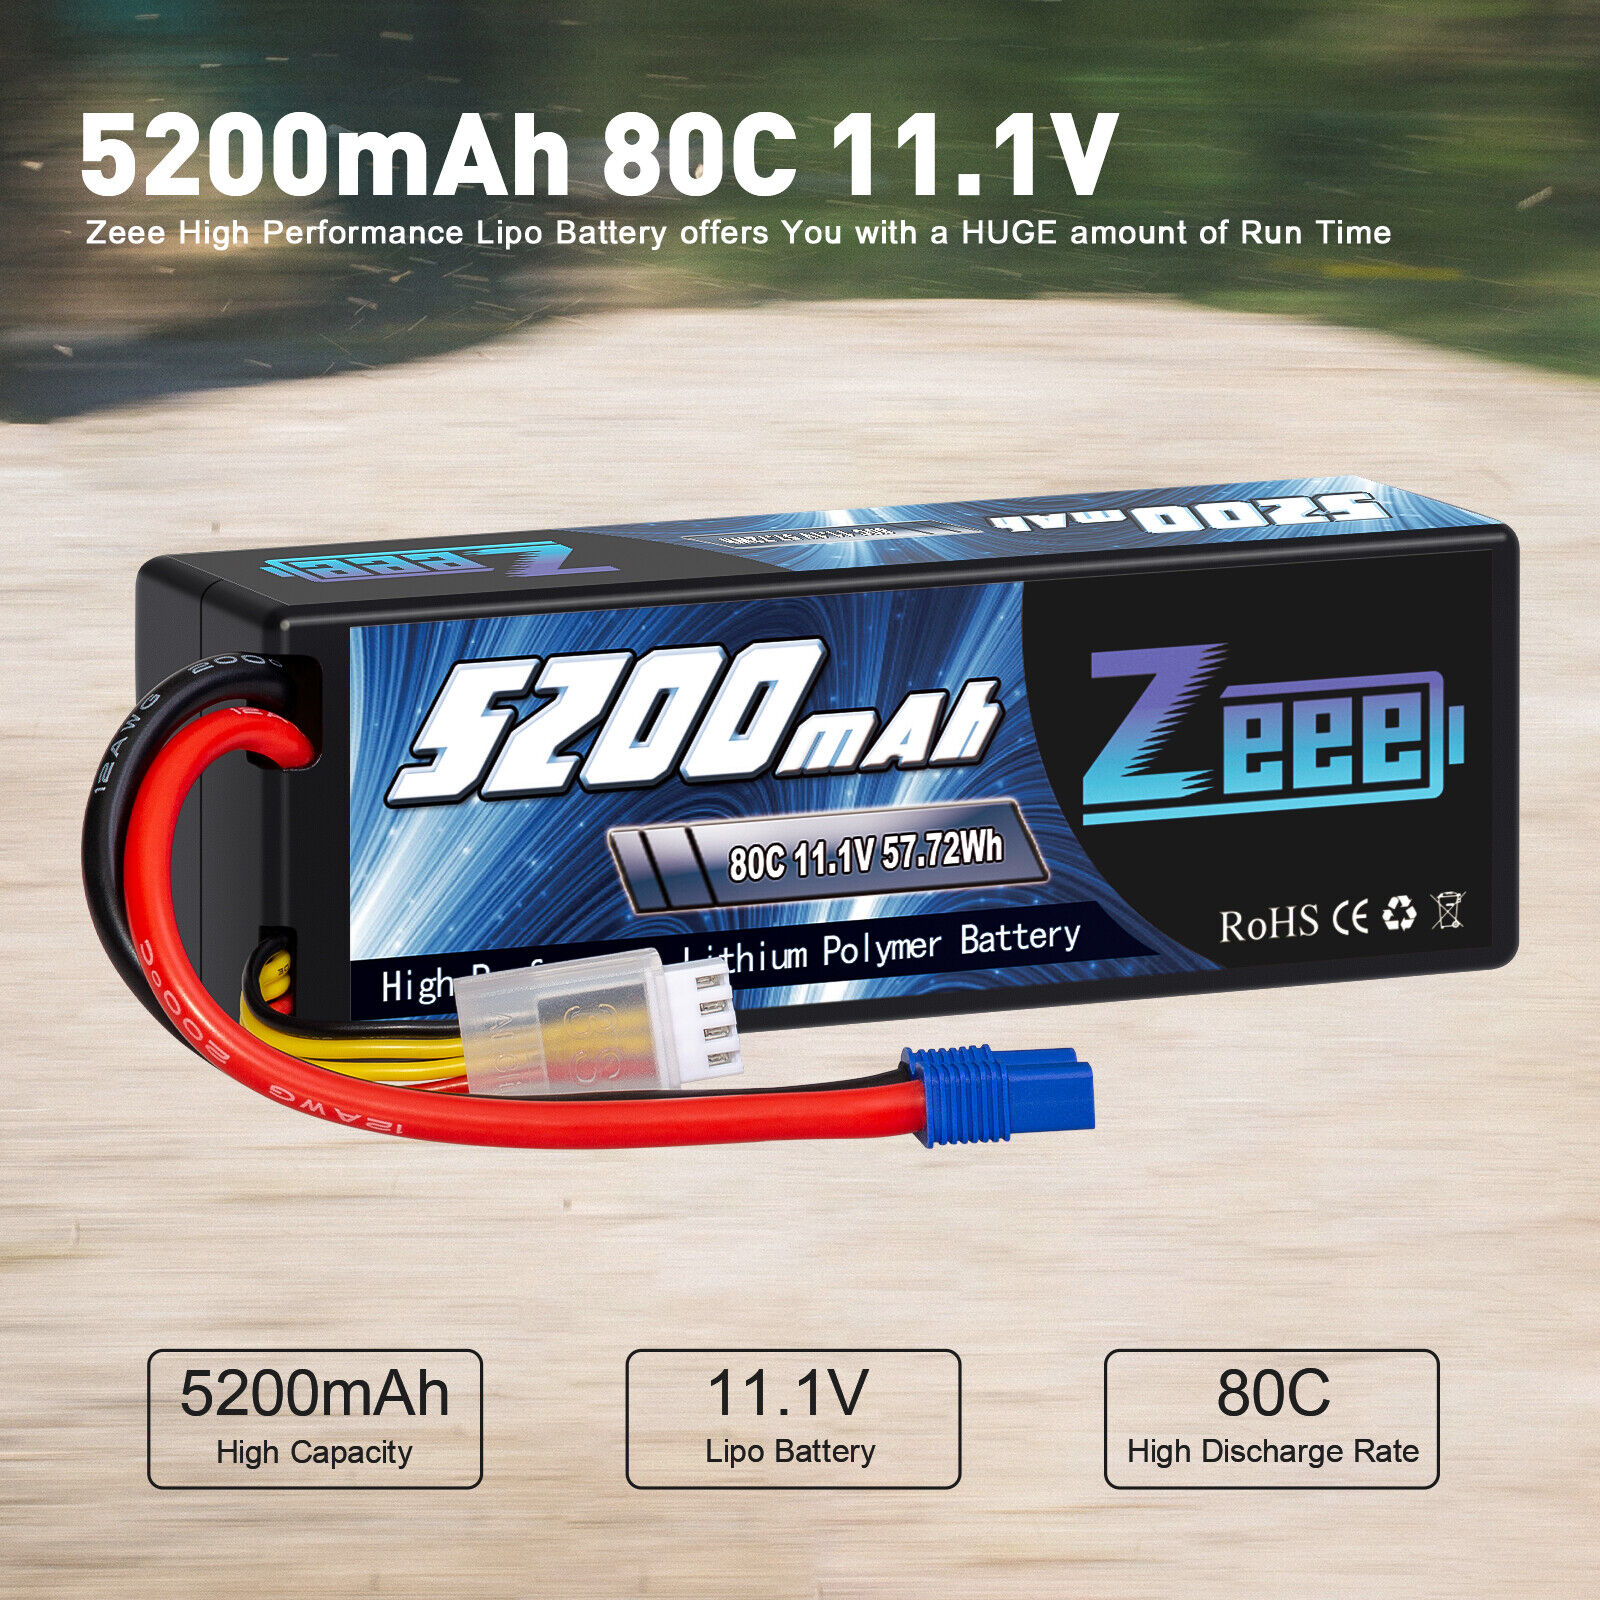 2x Zeee 11.1V 80C 5200mAh EC3 3S LiPo Battery for RC Car Truck Helicopter Buggy ZEEE Does Not Apply - фотография #3